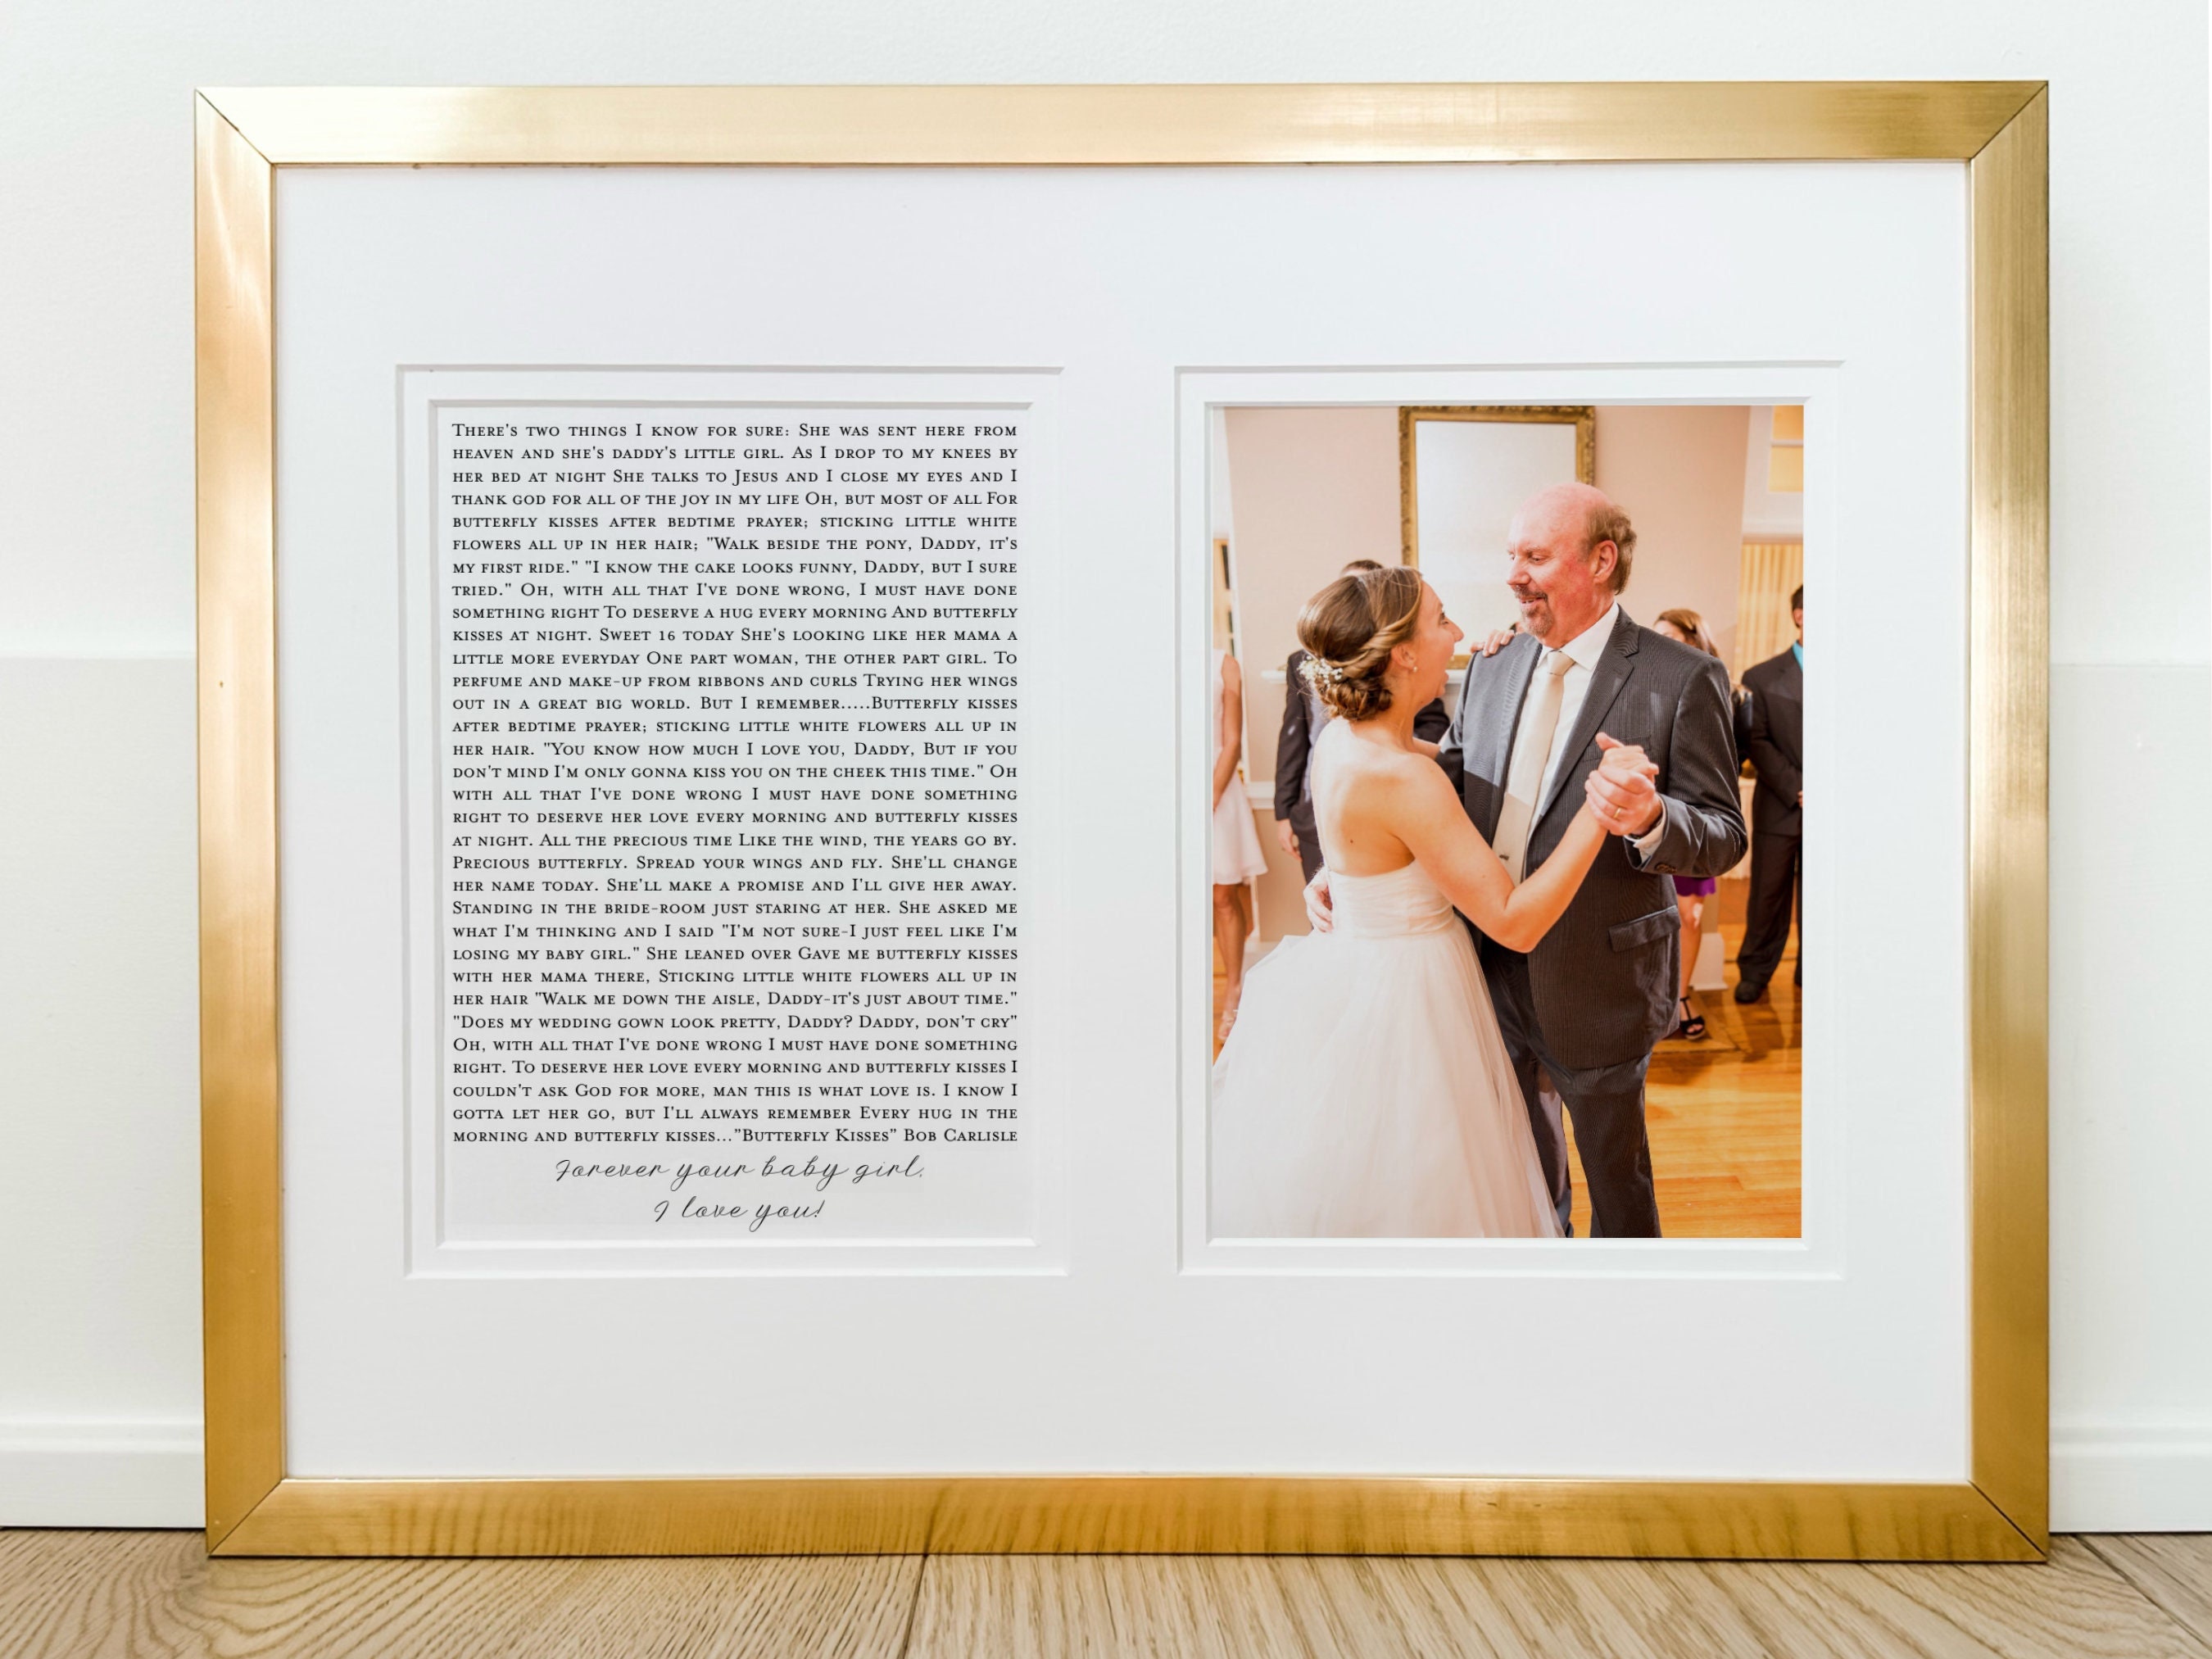 Fathers Day Gift From Daughter, for Dad From Adult Daughter, Picture of Us  Dancing, Special Gifts for Dad, Dad Gifts, Keepsake Frame 